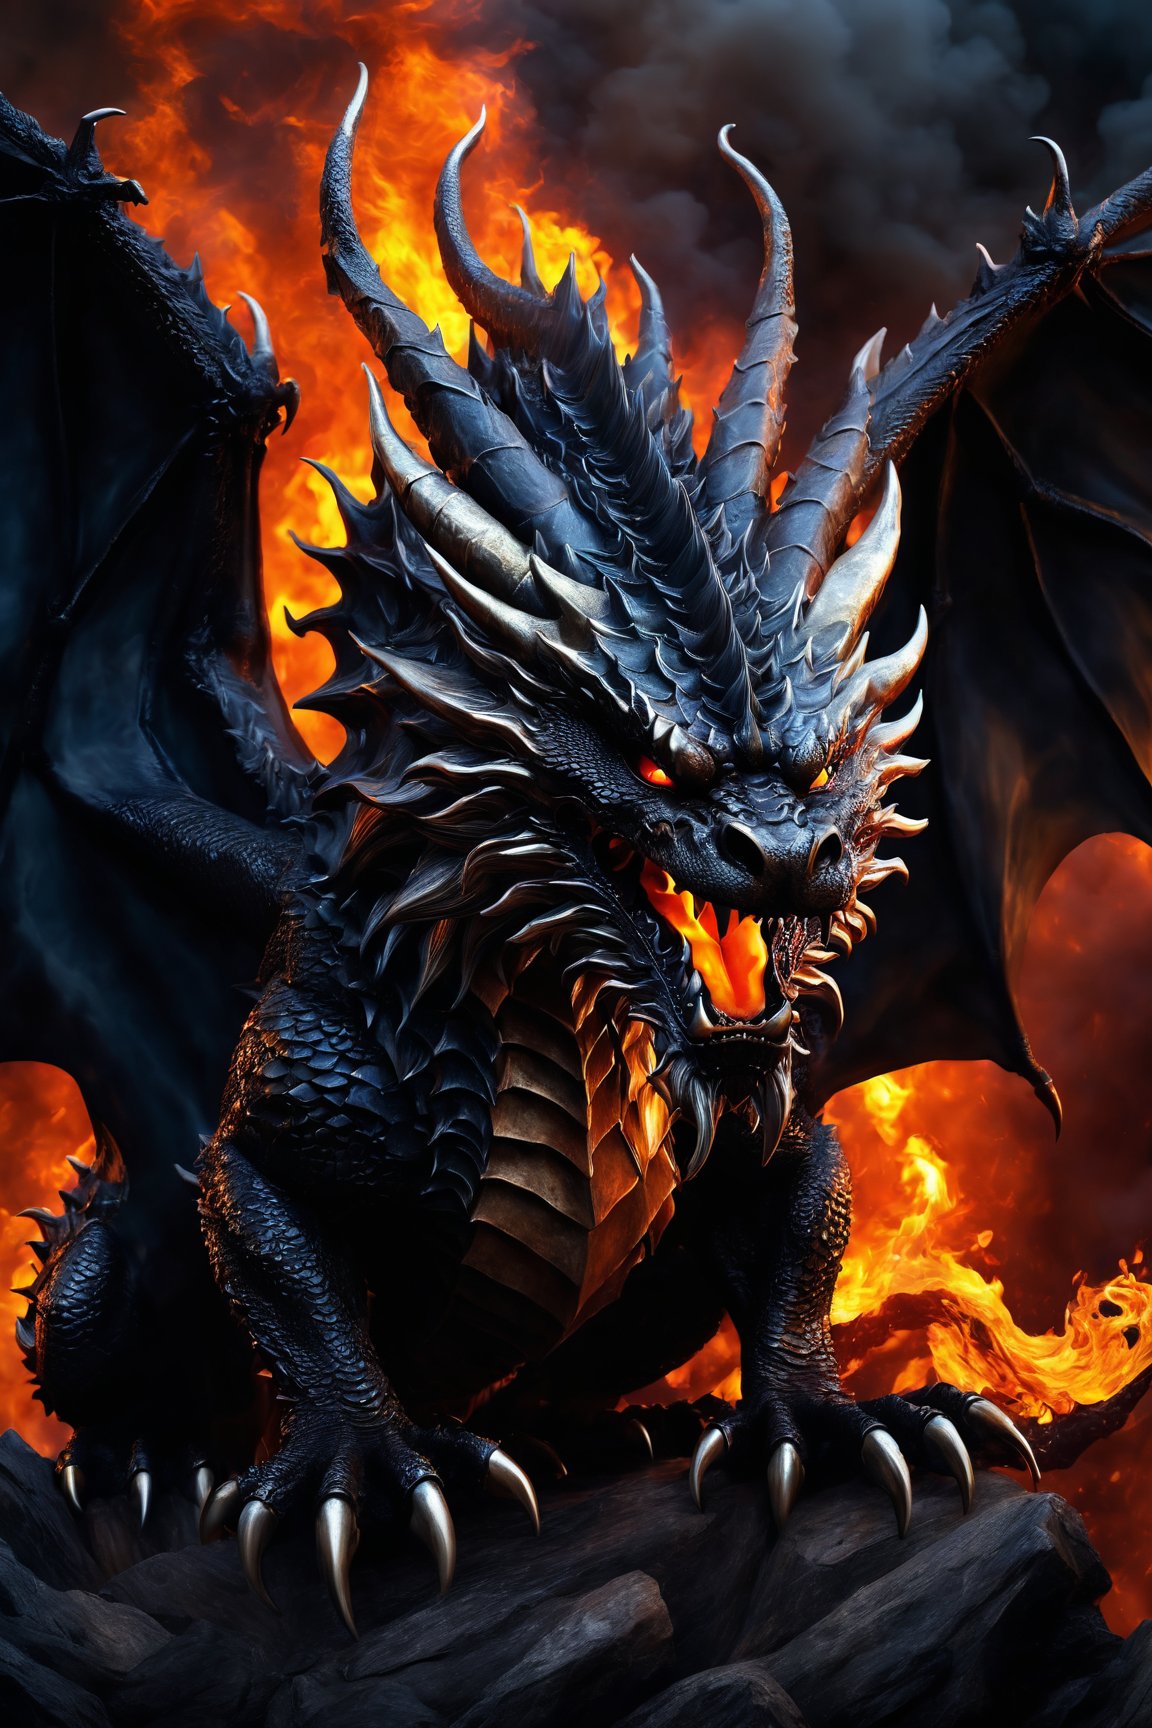 (best quality,4k,highres,masterpiece:1.2),ultra-detailed,(realistic,photorealistic,photo-realistic:1.37),fantasy dragon,angry face,burning fire,hell,fiery breath,sharp fangs,fierce eyes,dark scales,billowing smoke,massive wings,intense heat,molten lava,majestic creature,dark aura,ominous presence,demonic horns,scorching flames,mysterious shadows,ominous sky,molten gold,enchanted treasures,glistening talons,smoldering ashes,unleashed power,ominous glow,roaring inferno,sinister silhouette,savage claws,menacing presence,devastating power,terrifying beauty,fiery destruction,darkened skies,chaotic flames,living nightmare,ominous atmosphere,intense wrath